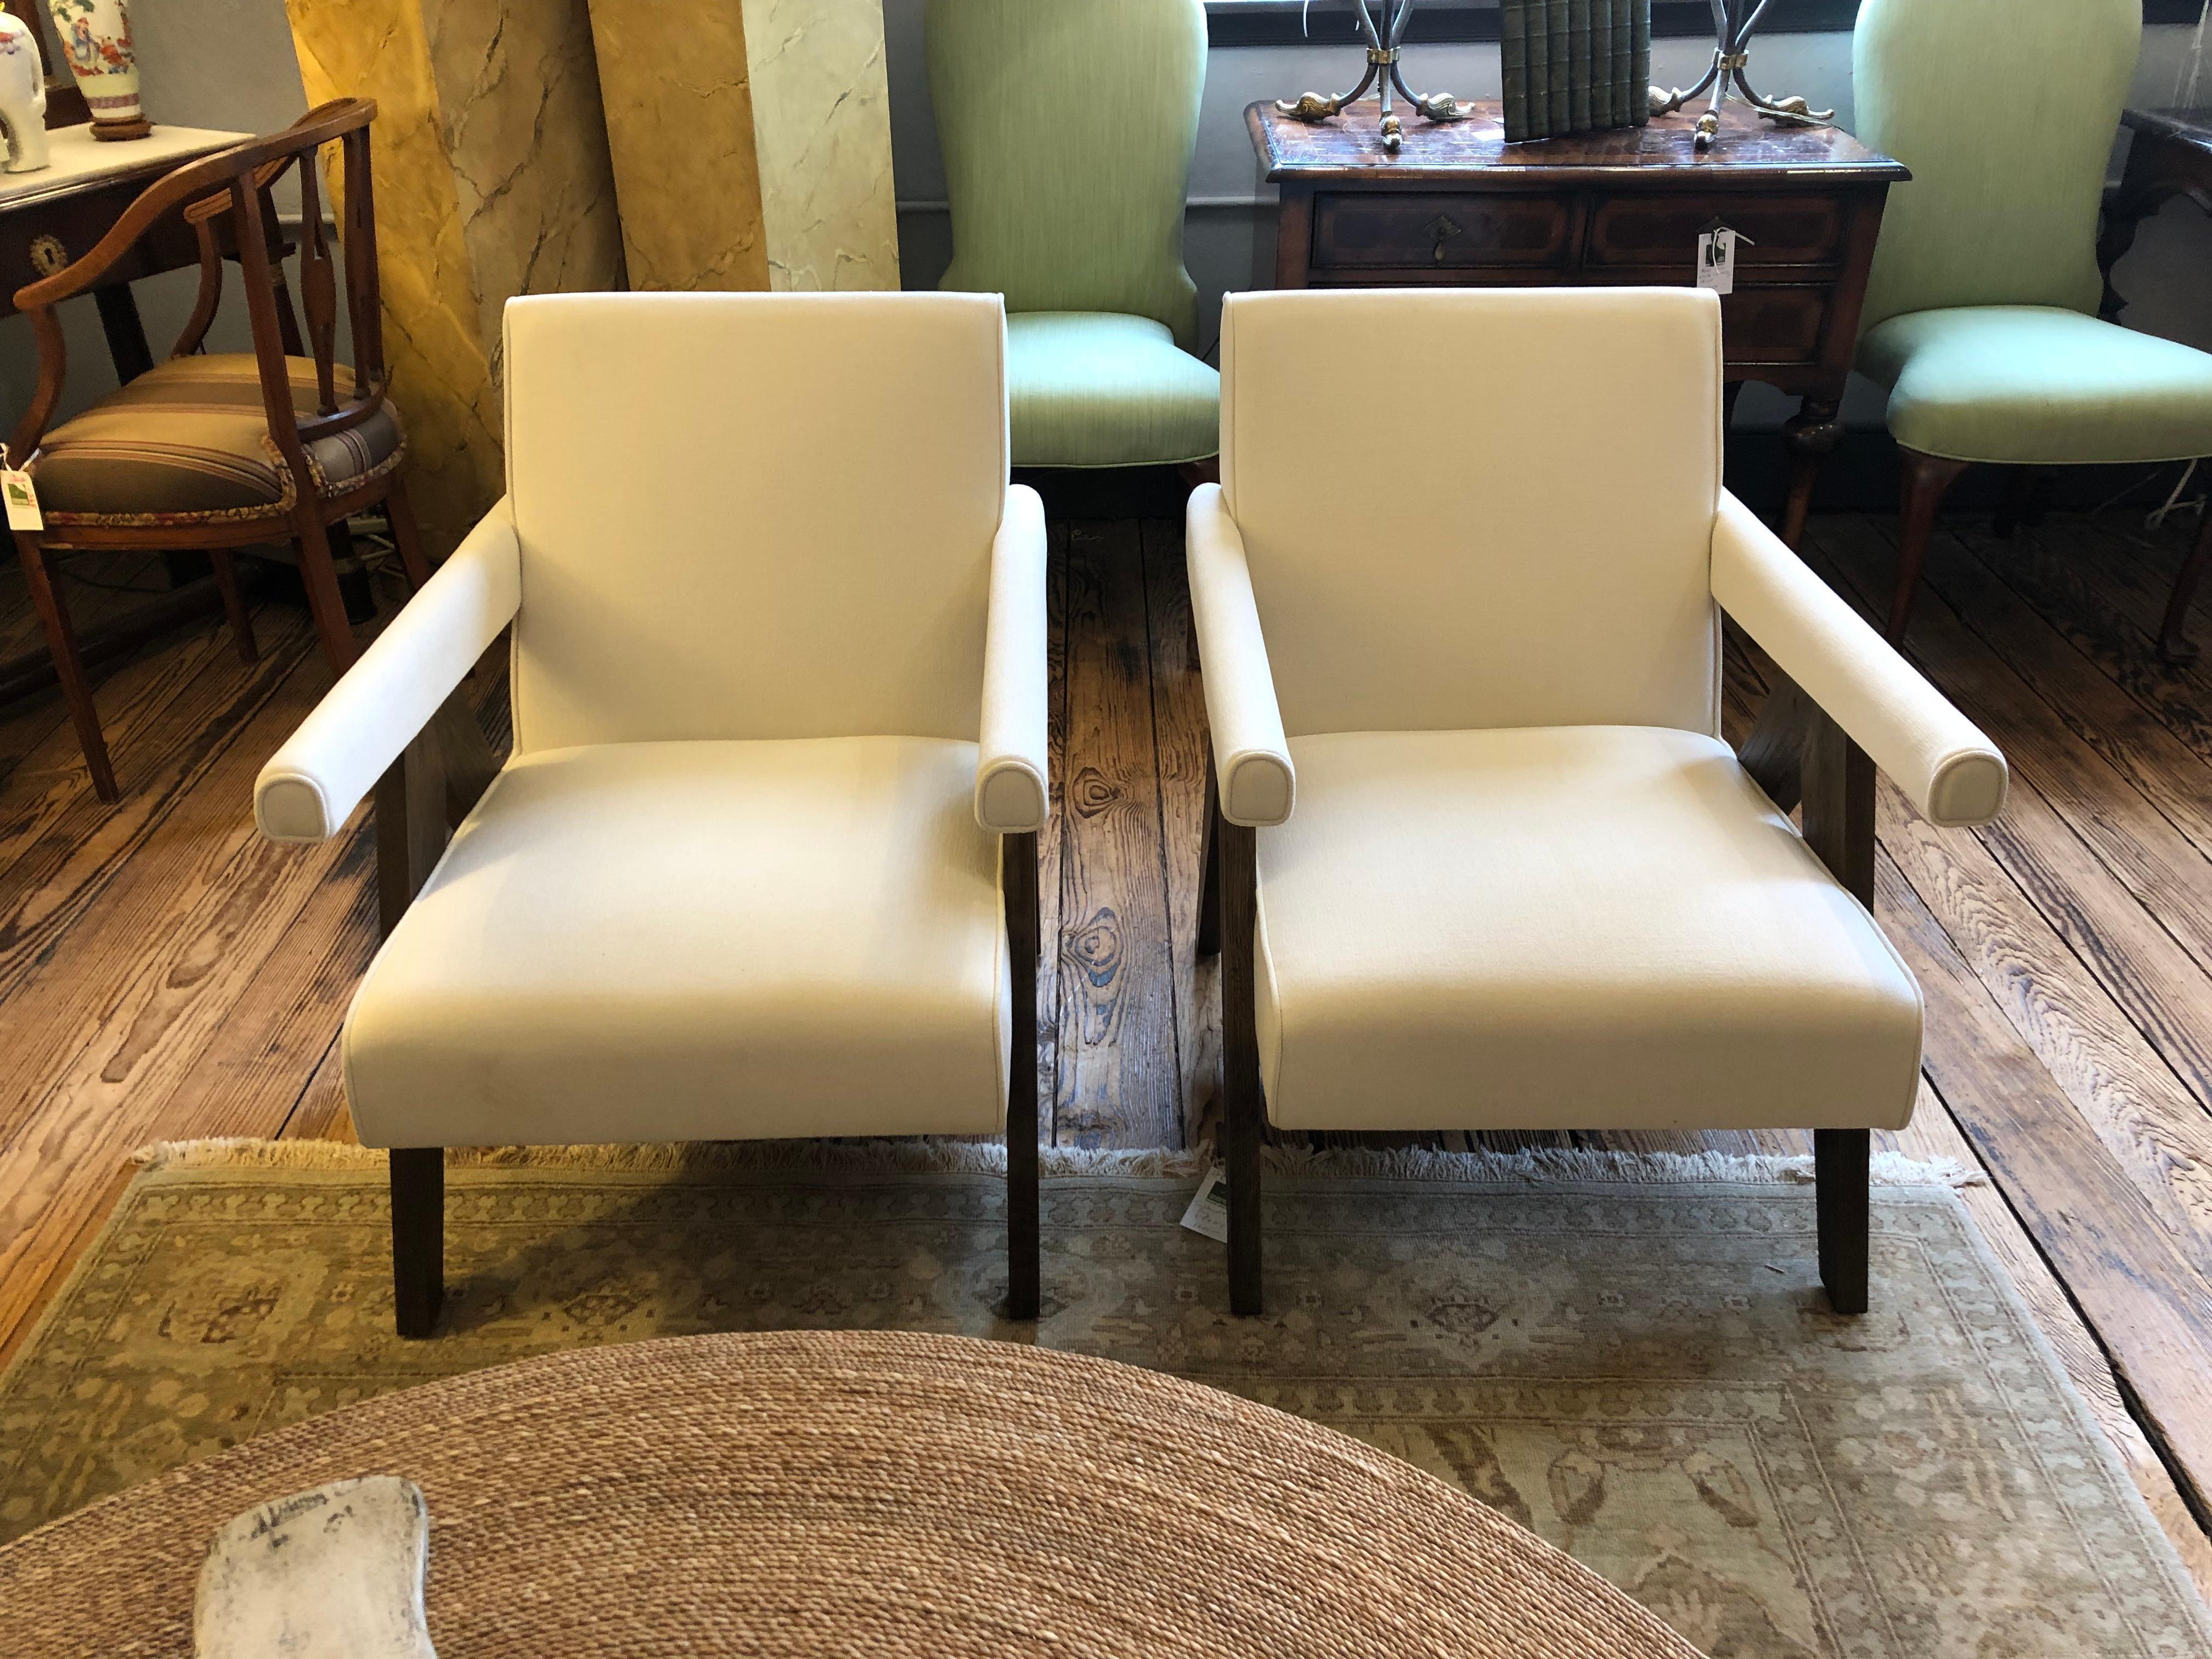 Striking sleek pair of designer club chairs having neutral white upholstery and upside down V walnut legs.  Great style and barely used.